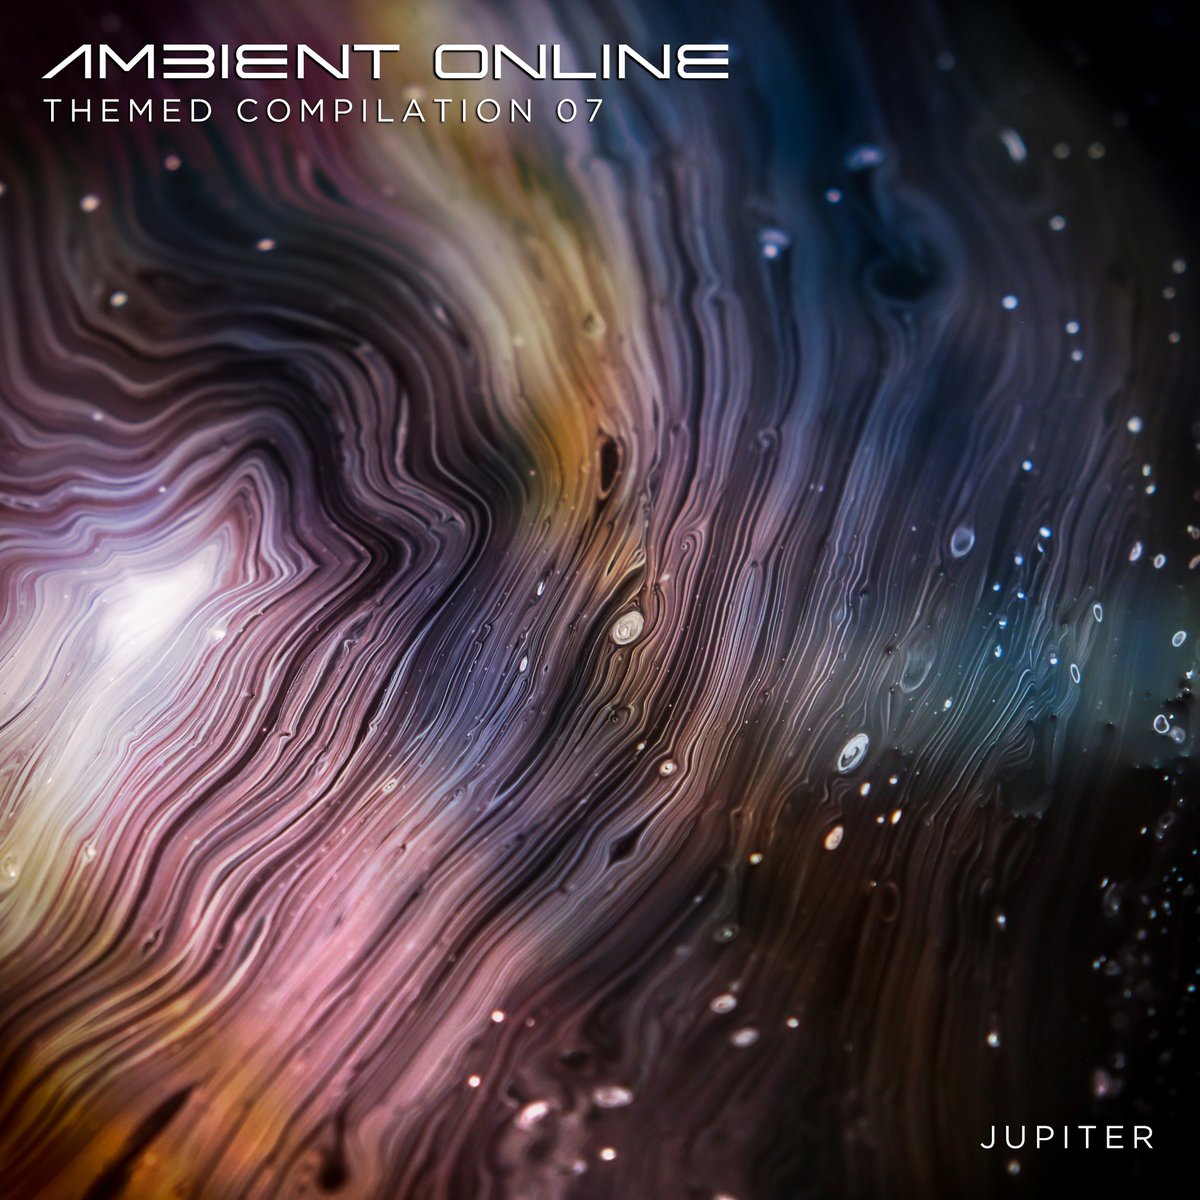 AVAILABLE NOW: Ambient Online Themed Compilation 07: Jupiter ambientonline.bandcamp.com/album/ambient-… Over 60 tracks and almost 8 hours of original Jupiter-themed ambient music from the #ambientonline community. #ambient #compilation